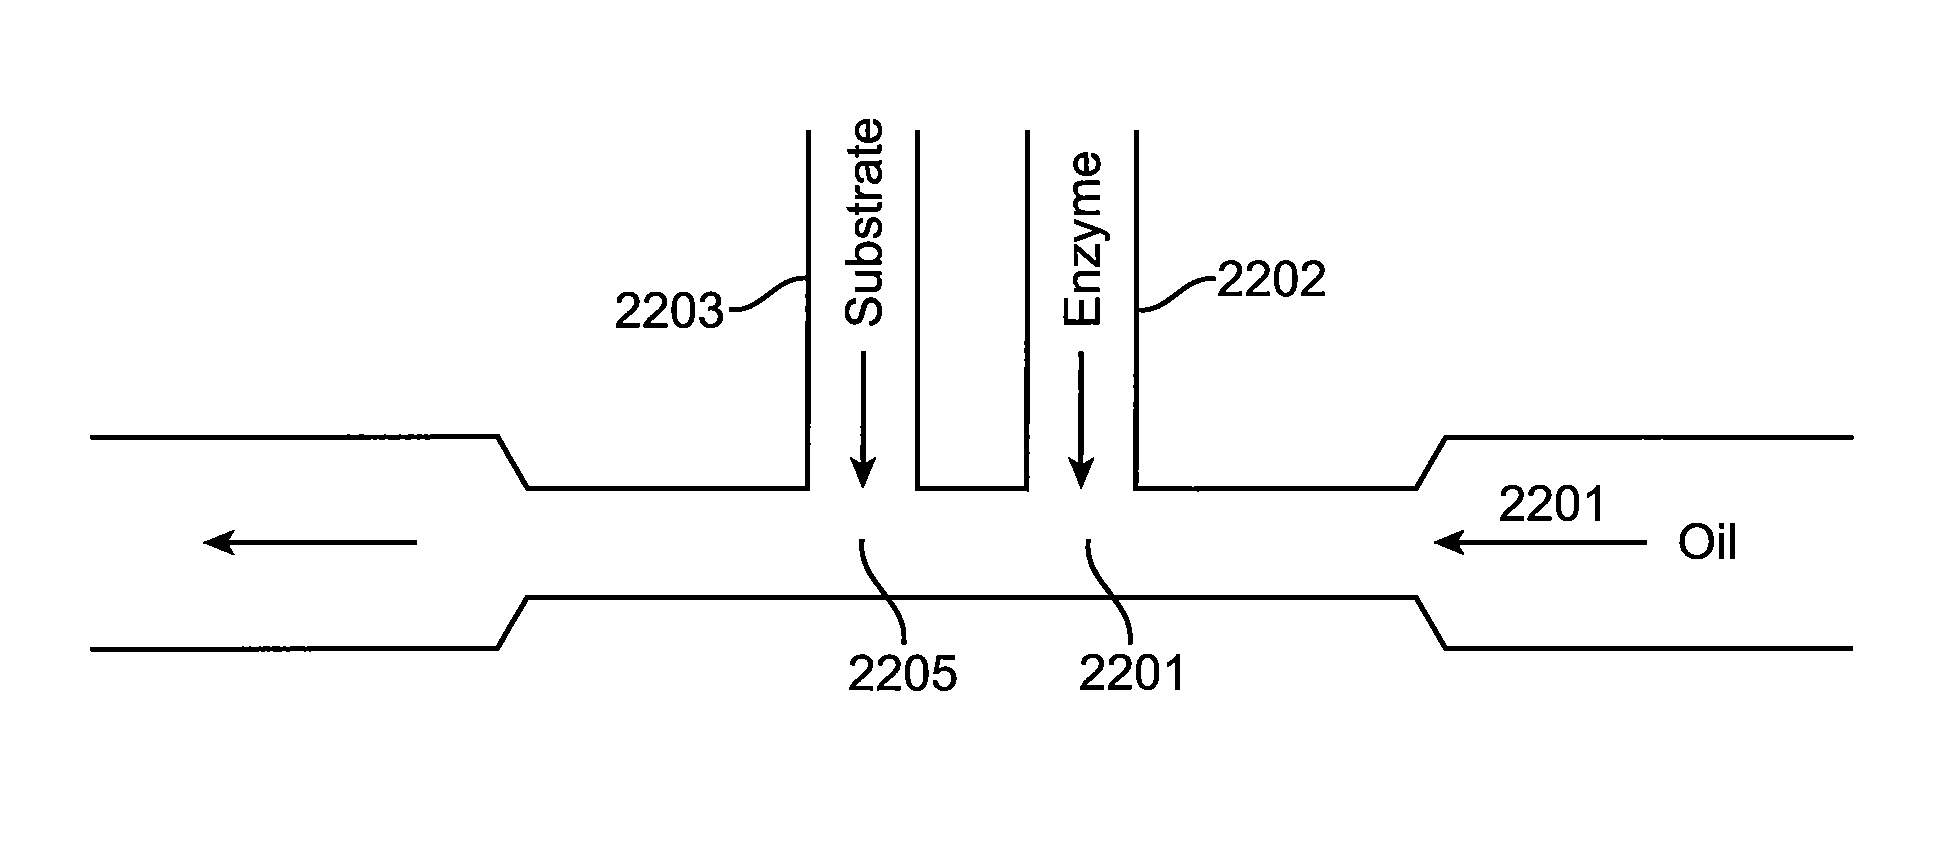 Microfabricated crossflow devices and methods